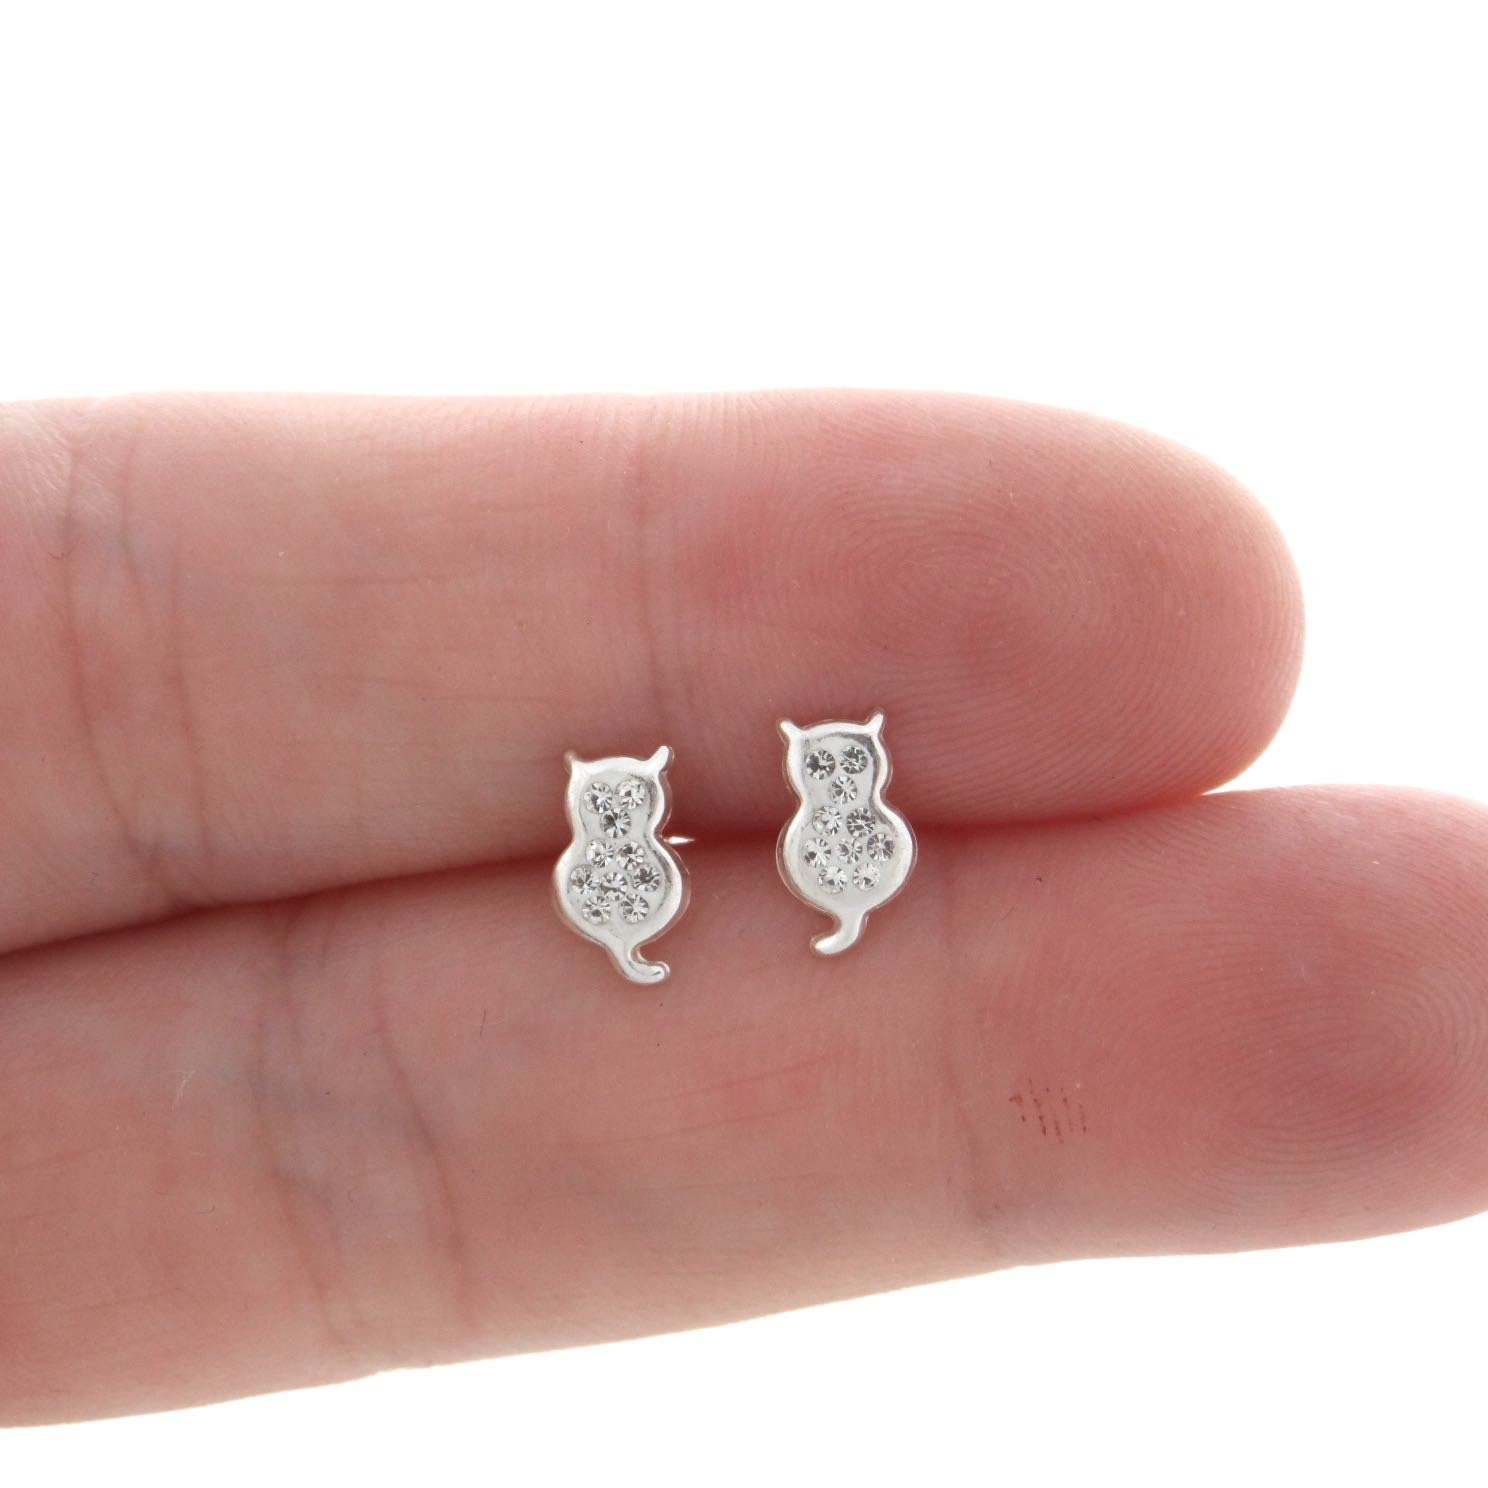 925 Sterling Silver Kitty Cat Screw Back Earrings for Young Girls &  Pre-Teens, Small Cat - Body Pierce Jewelry